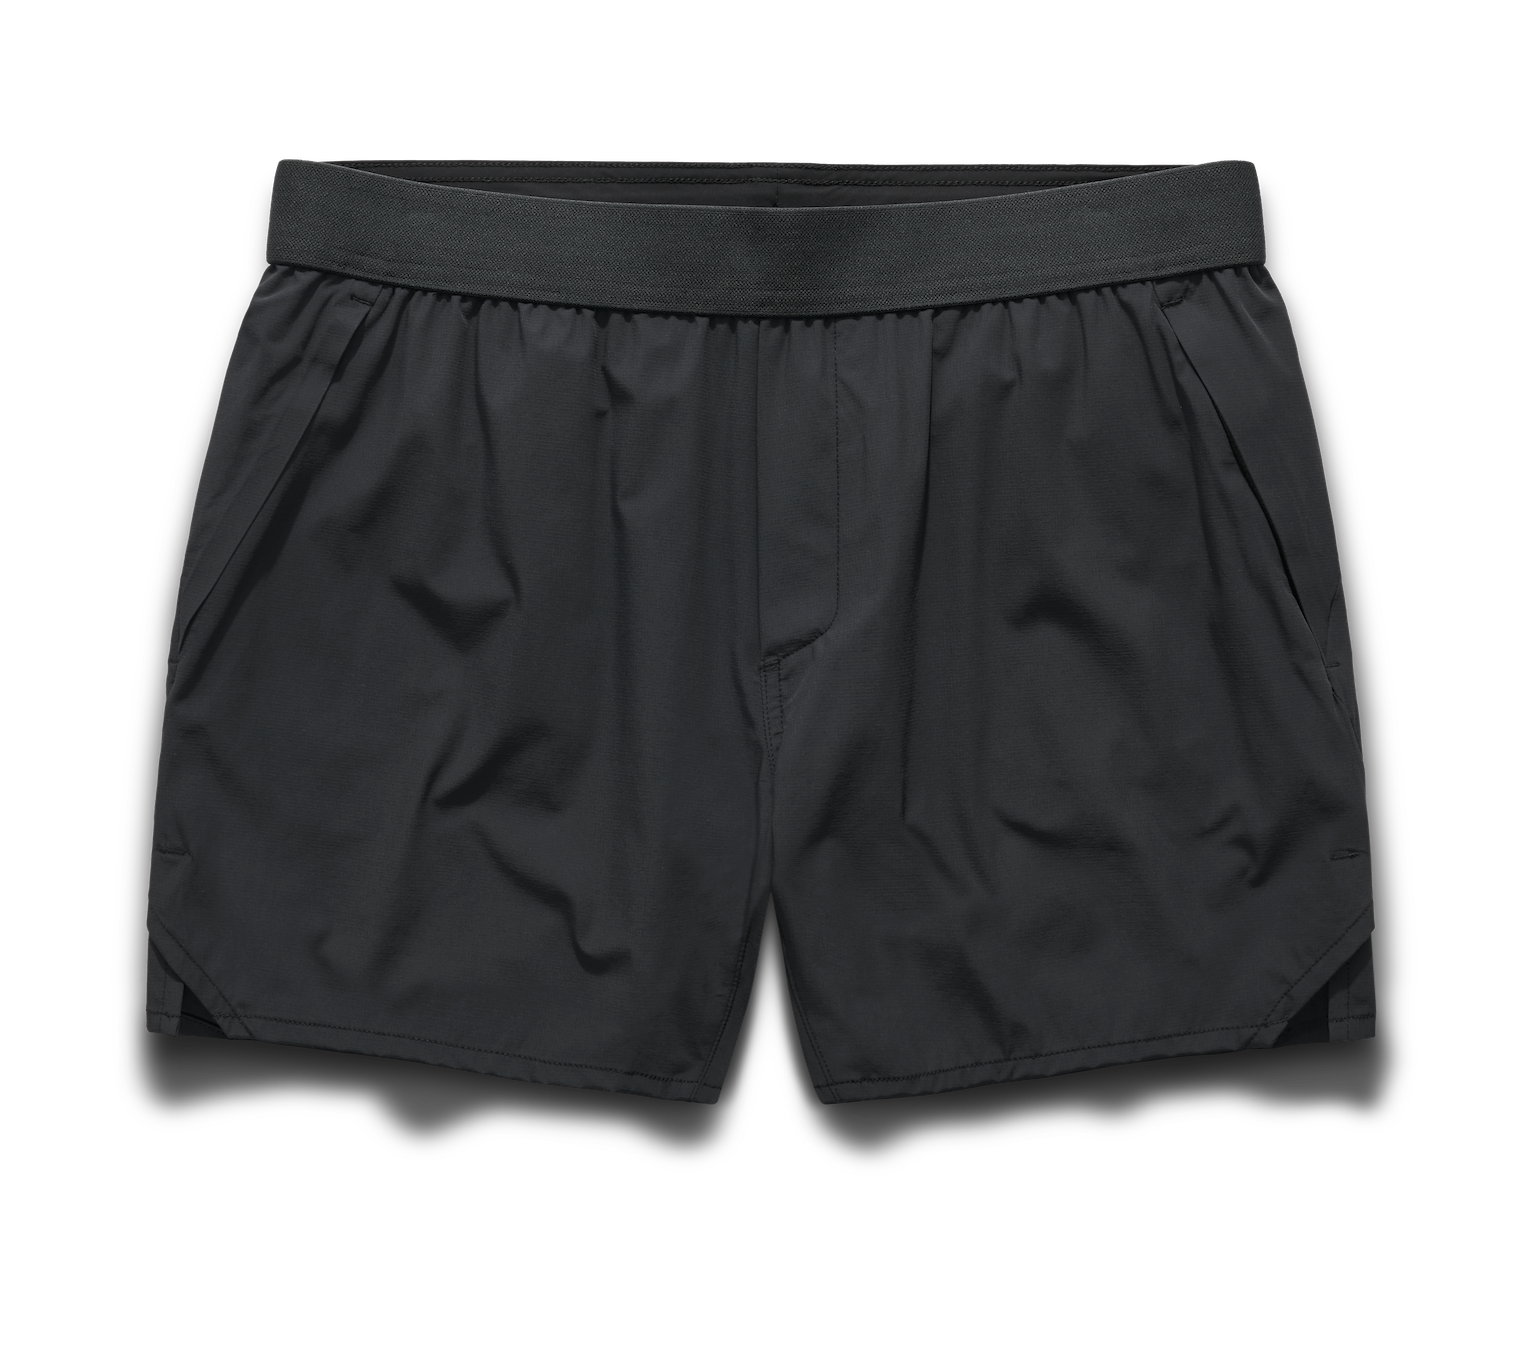 https://cdn.shopify.com/s/files/1/0251/7377/products/Tactical_Shorts_5in_Black_Frontcopy_9a3fcaf5-691b-4b0a-8fc4-706606d0ac2d.png?v=1680268176